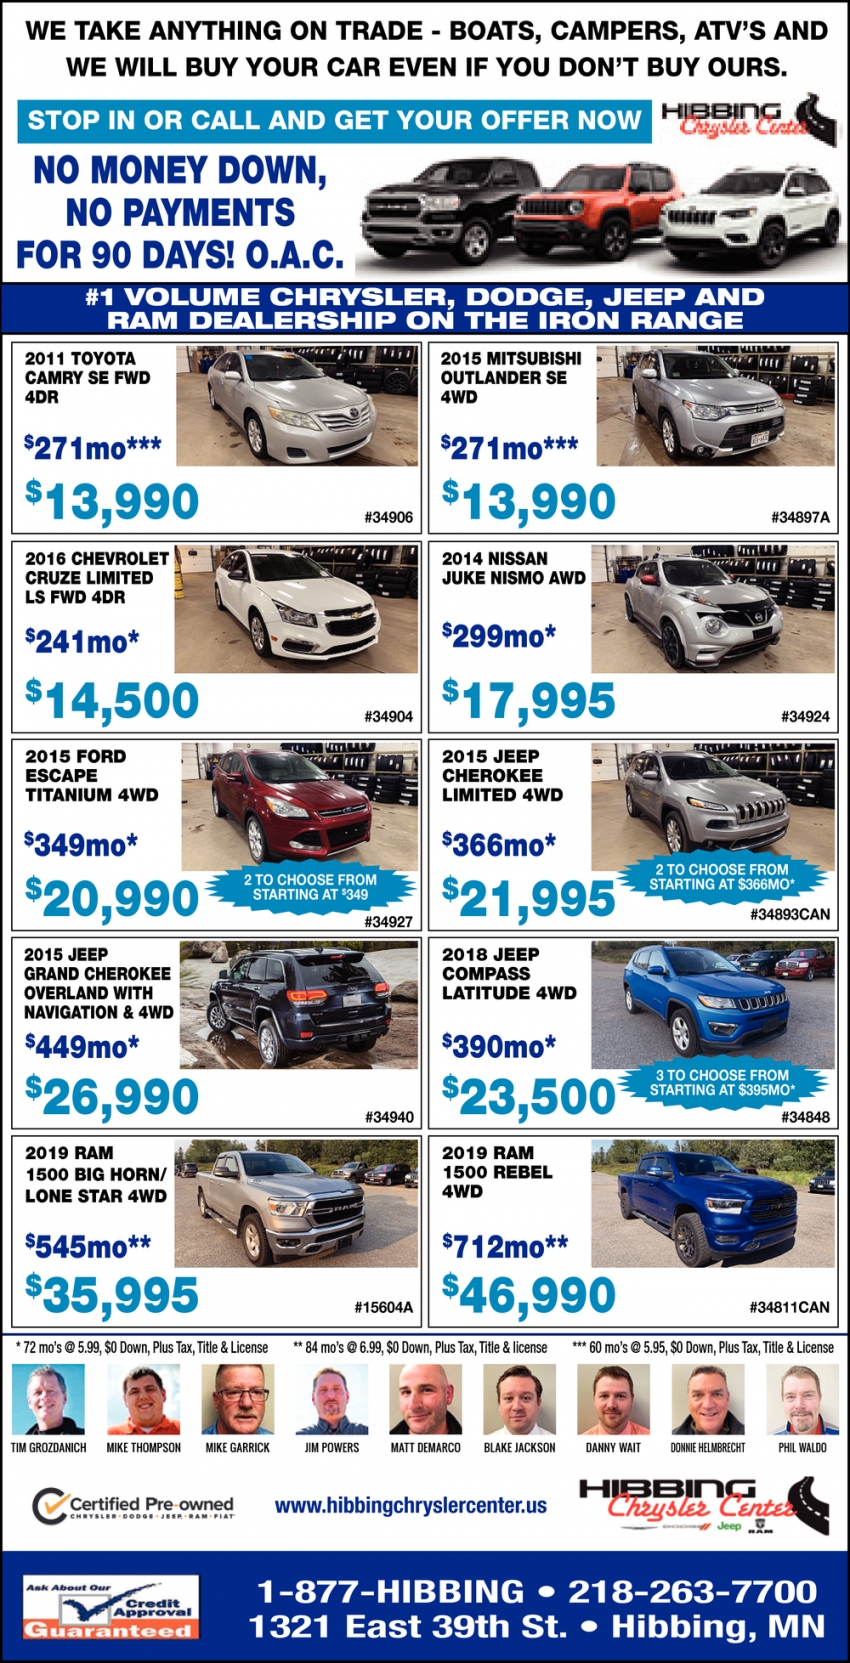 Stop In Or Call And Get Your Offer Now